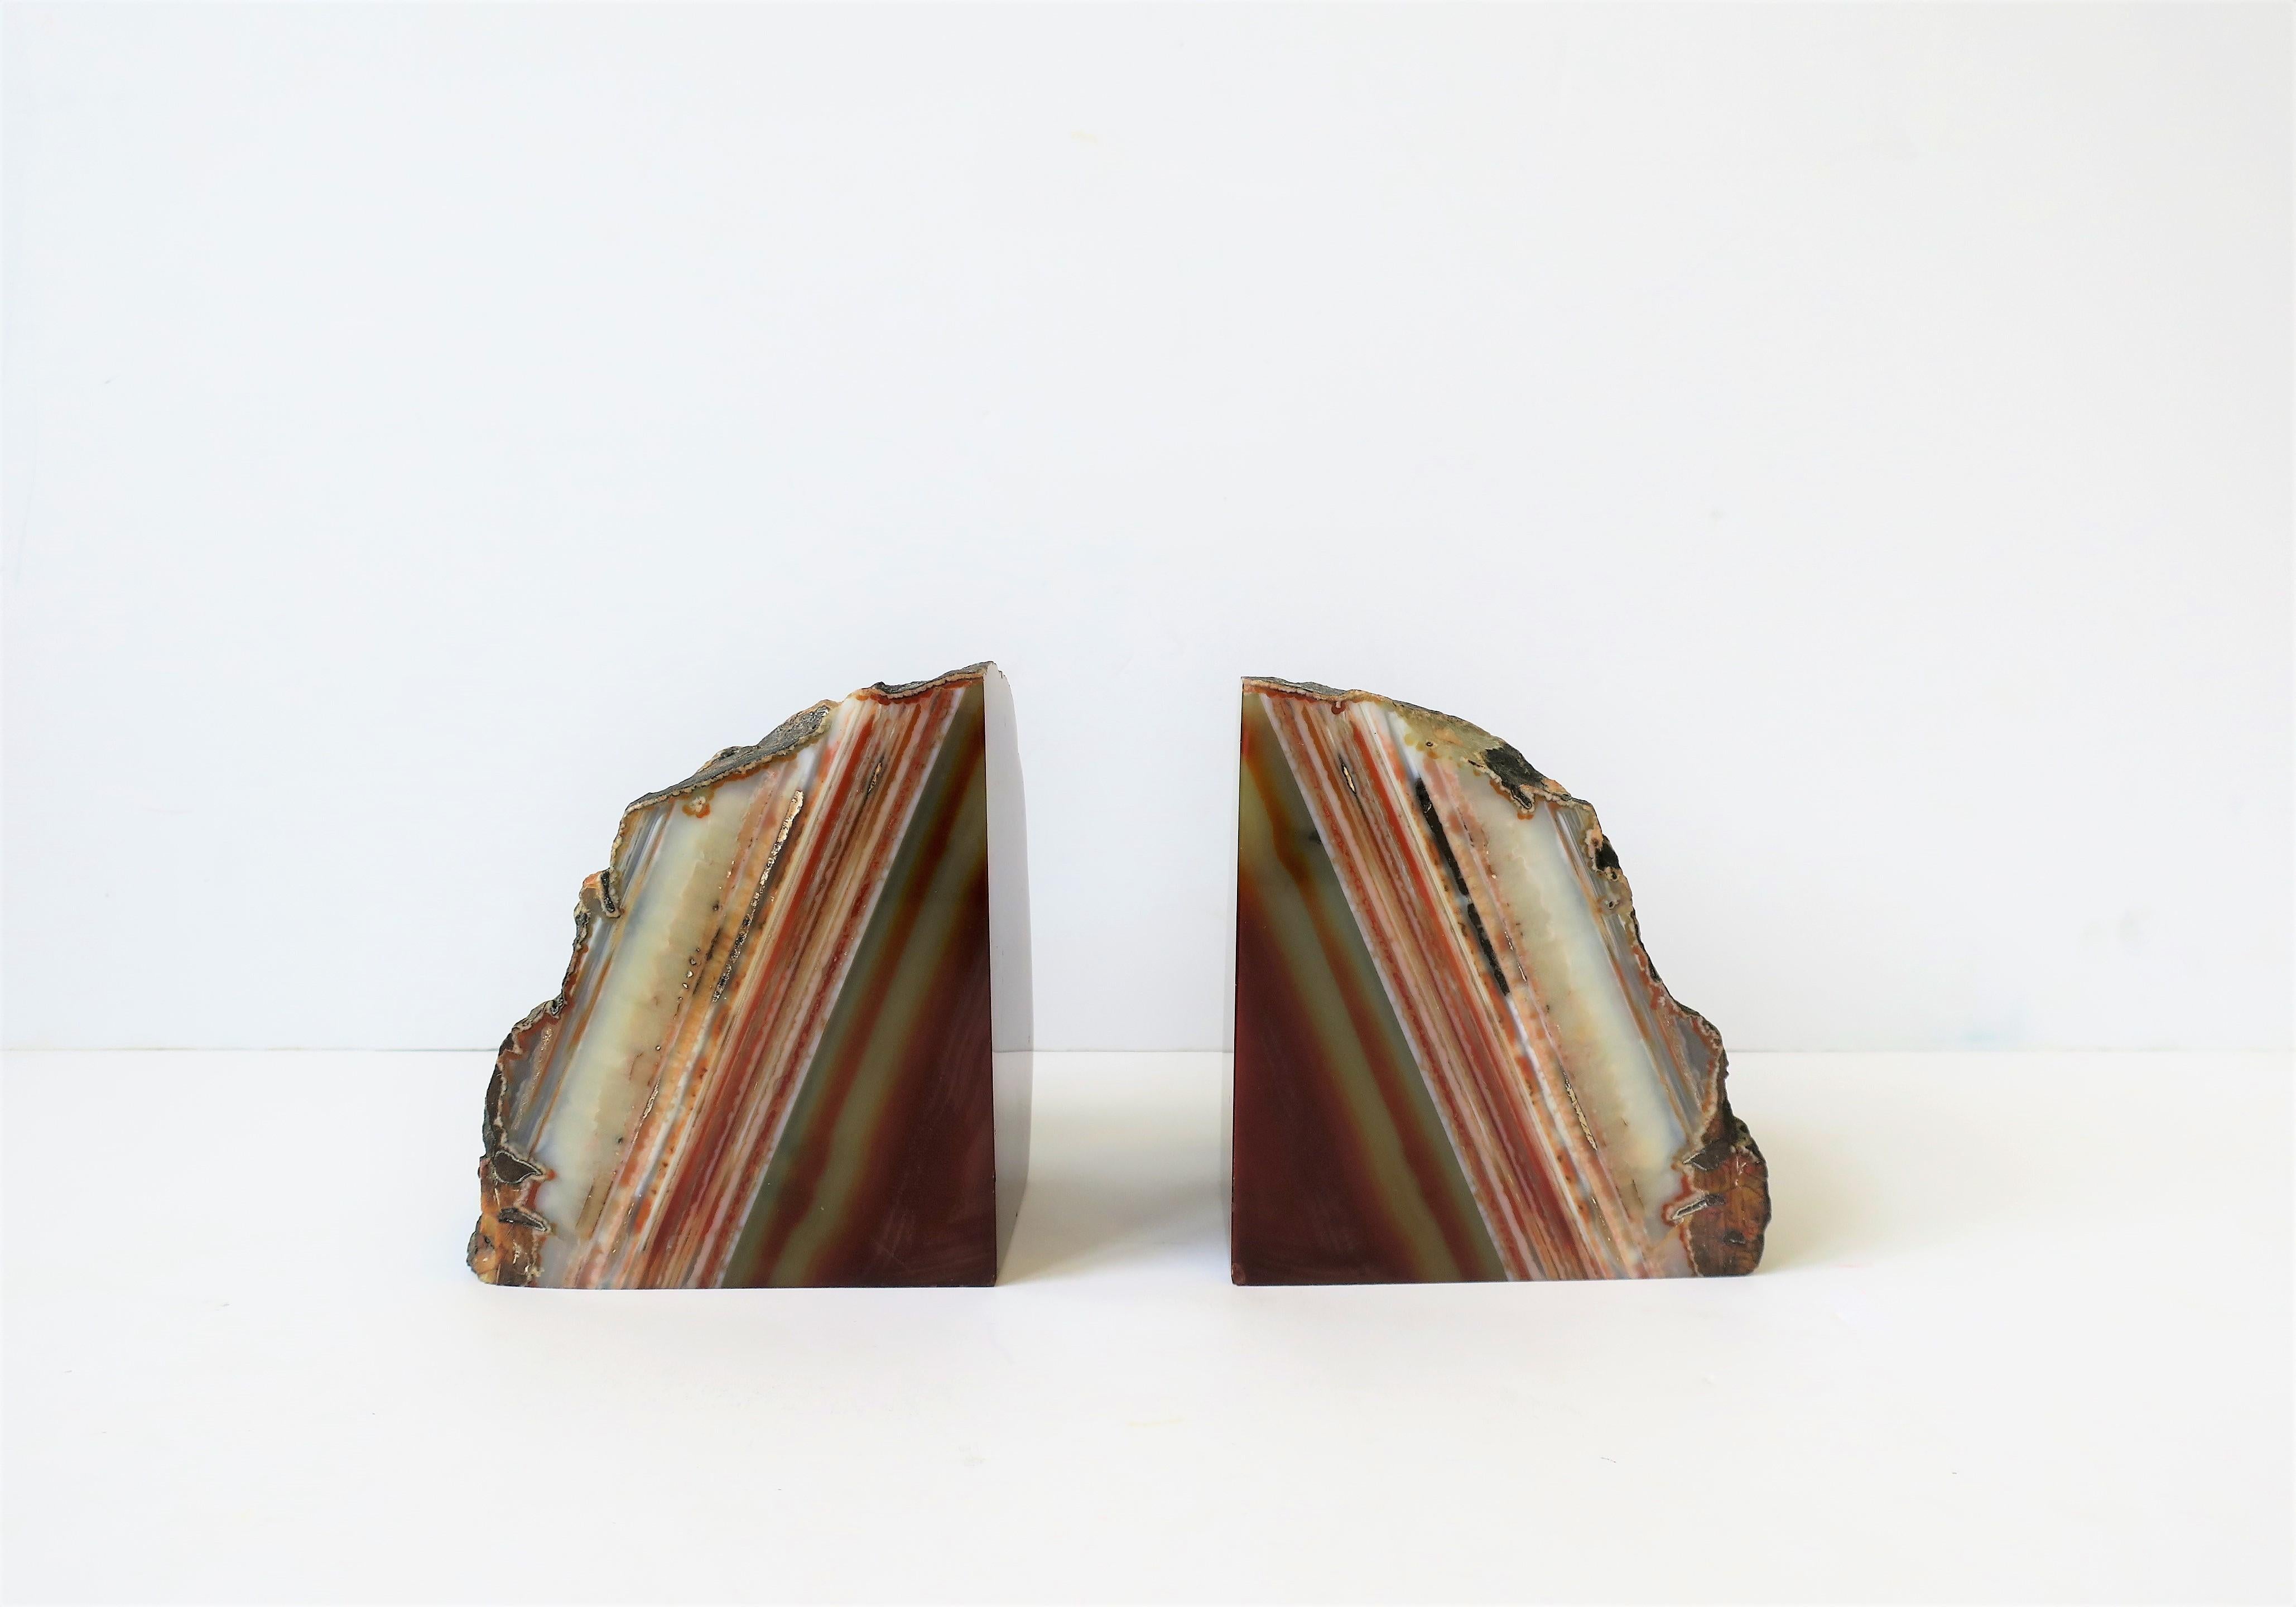 A substantial and beautiful pair of red burgundy onyx marble bookends or decorative objects. Colors include shades of white, red burgundy, and a touch of gold. Dimensions: 3.75